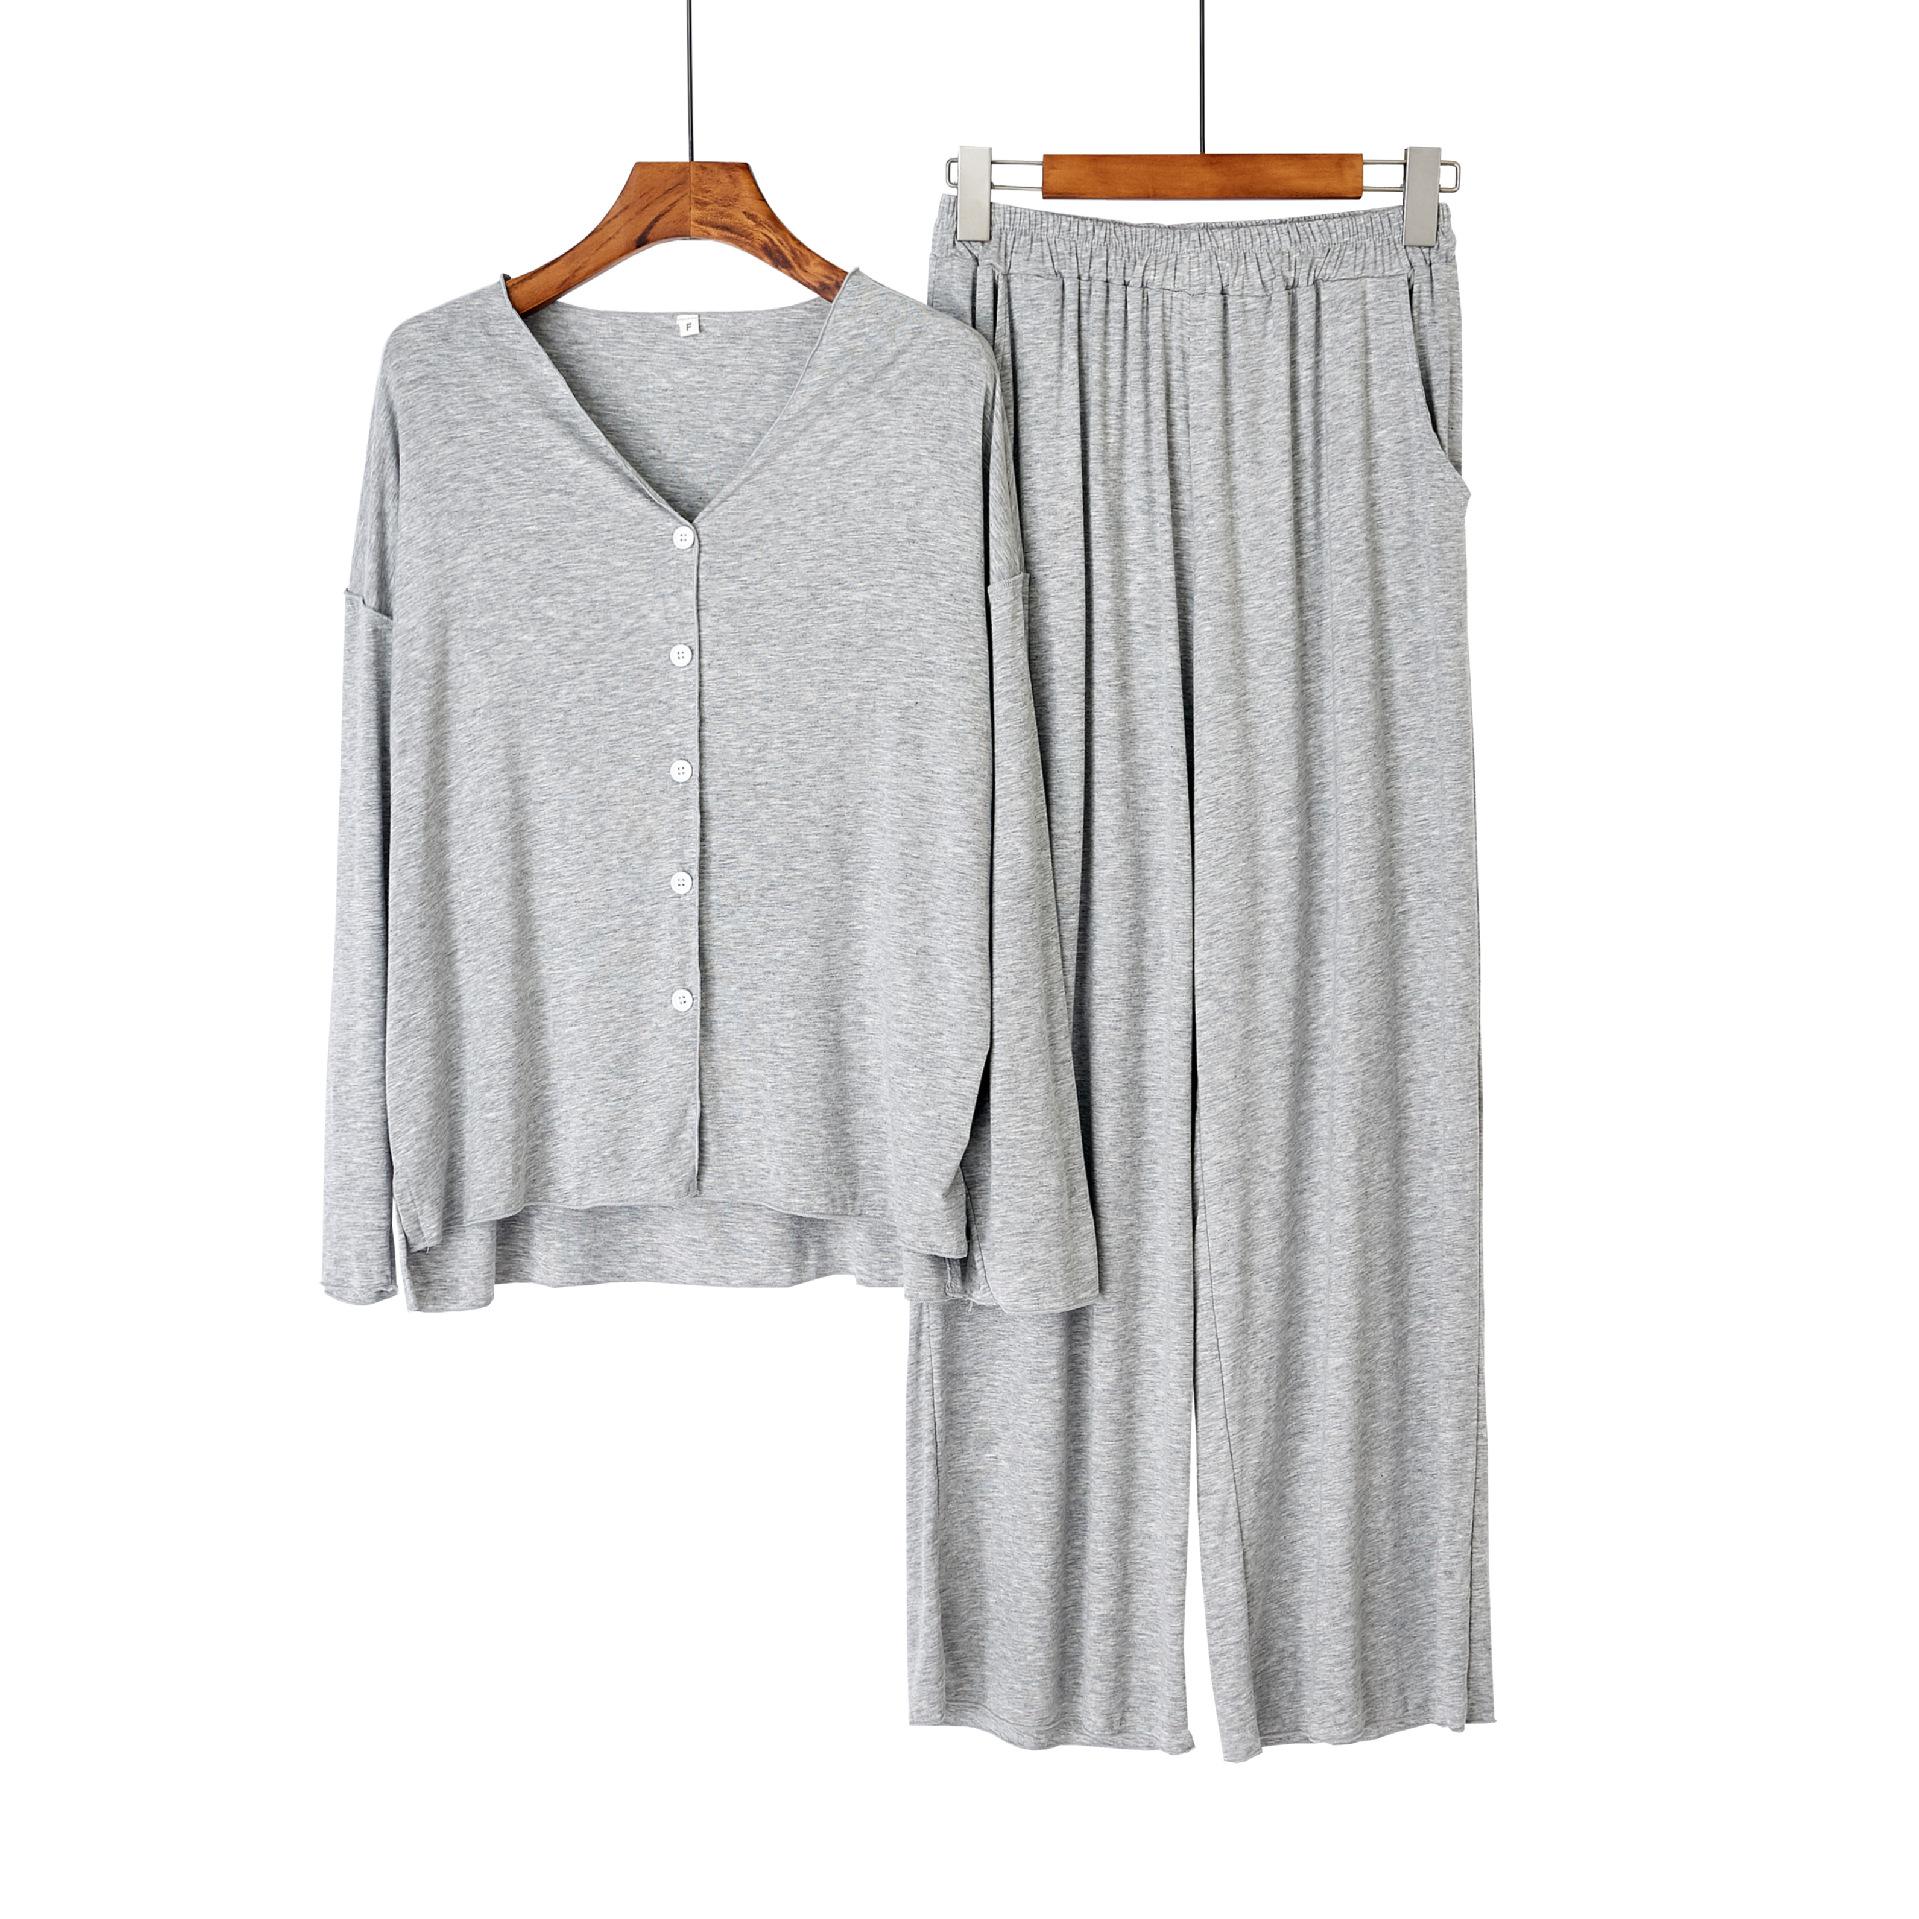 Изображение товара: Japanese new style cotton pajamas suit ladies spring and autumn cardigan solid color long-sleeved trousers home service suit